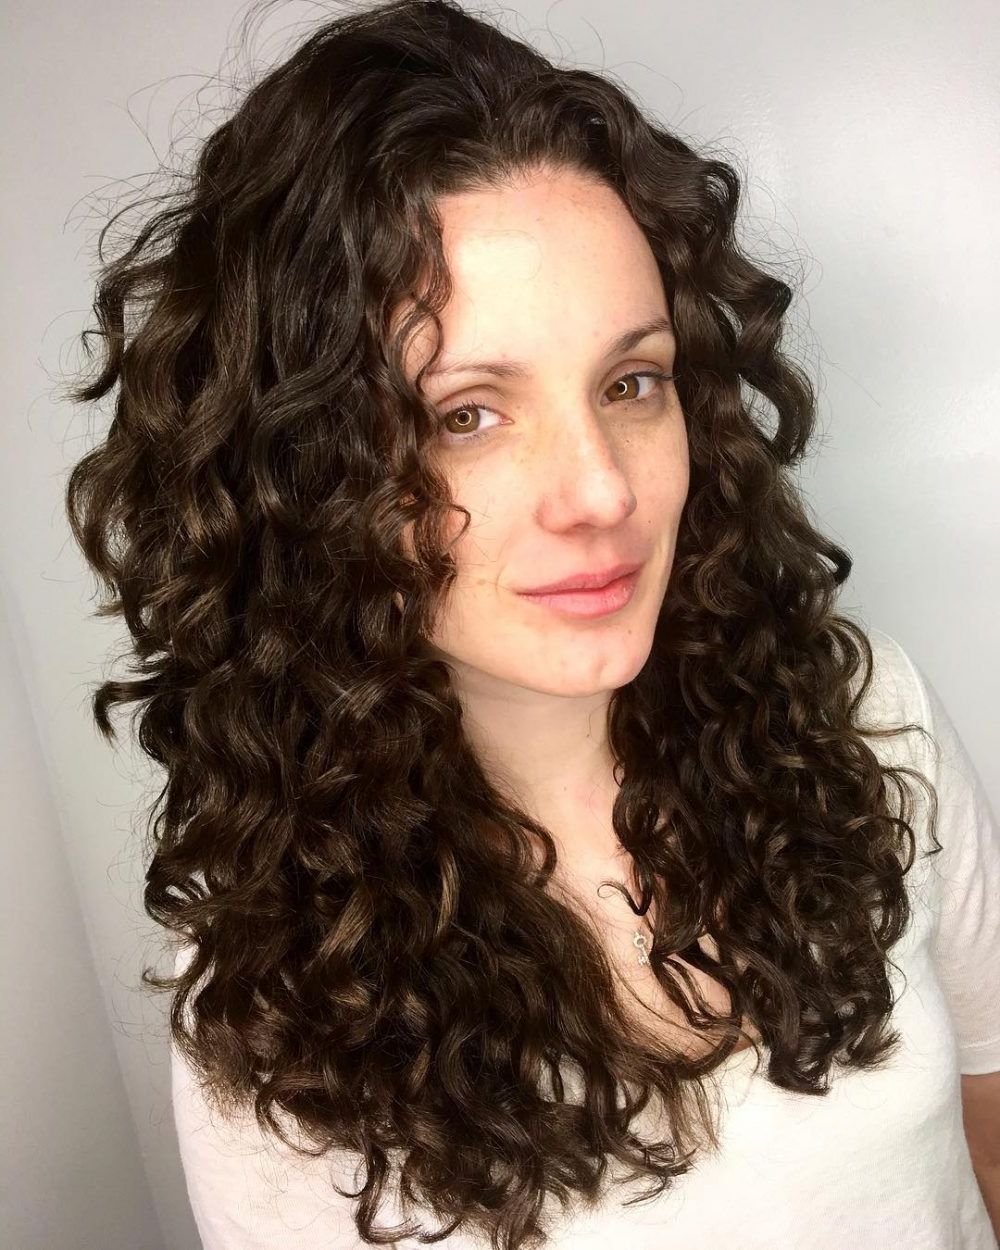 25 Cutest Long Curly Hair Ideas Of 2018 For Casual Scrunched Hairstyles For Short Curly Hair (View 12 of 25)